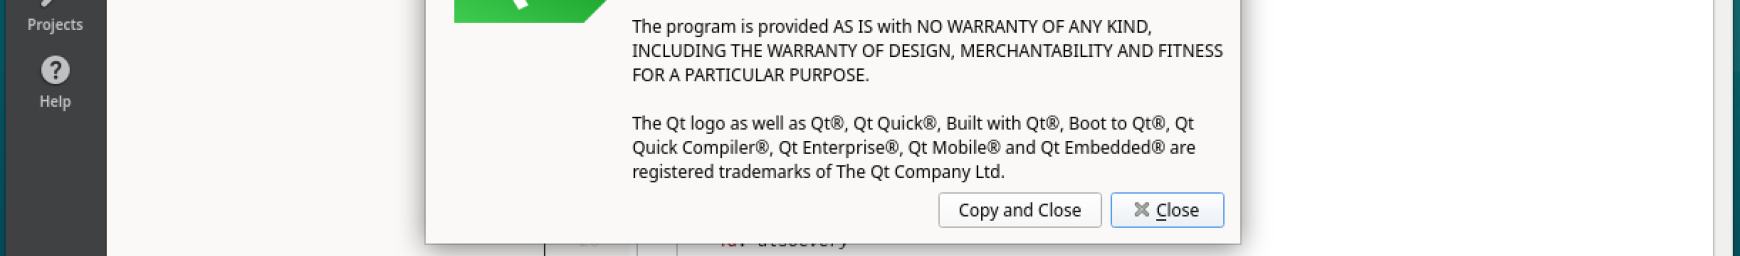 Qt Creator 13.0.0 running on a Raspberry Pi, "About Qt Creator" dialog is open